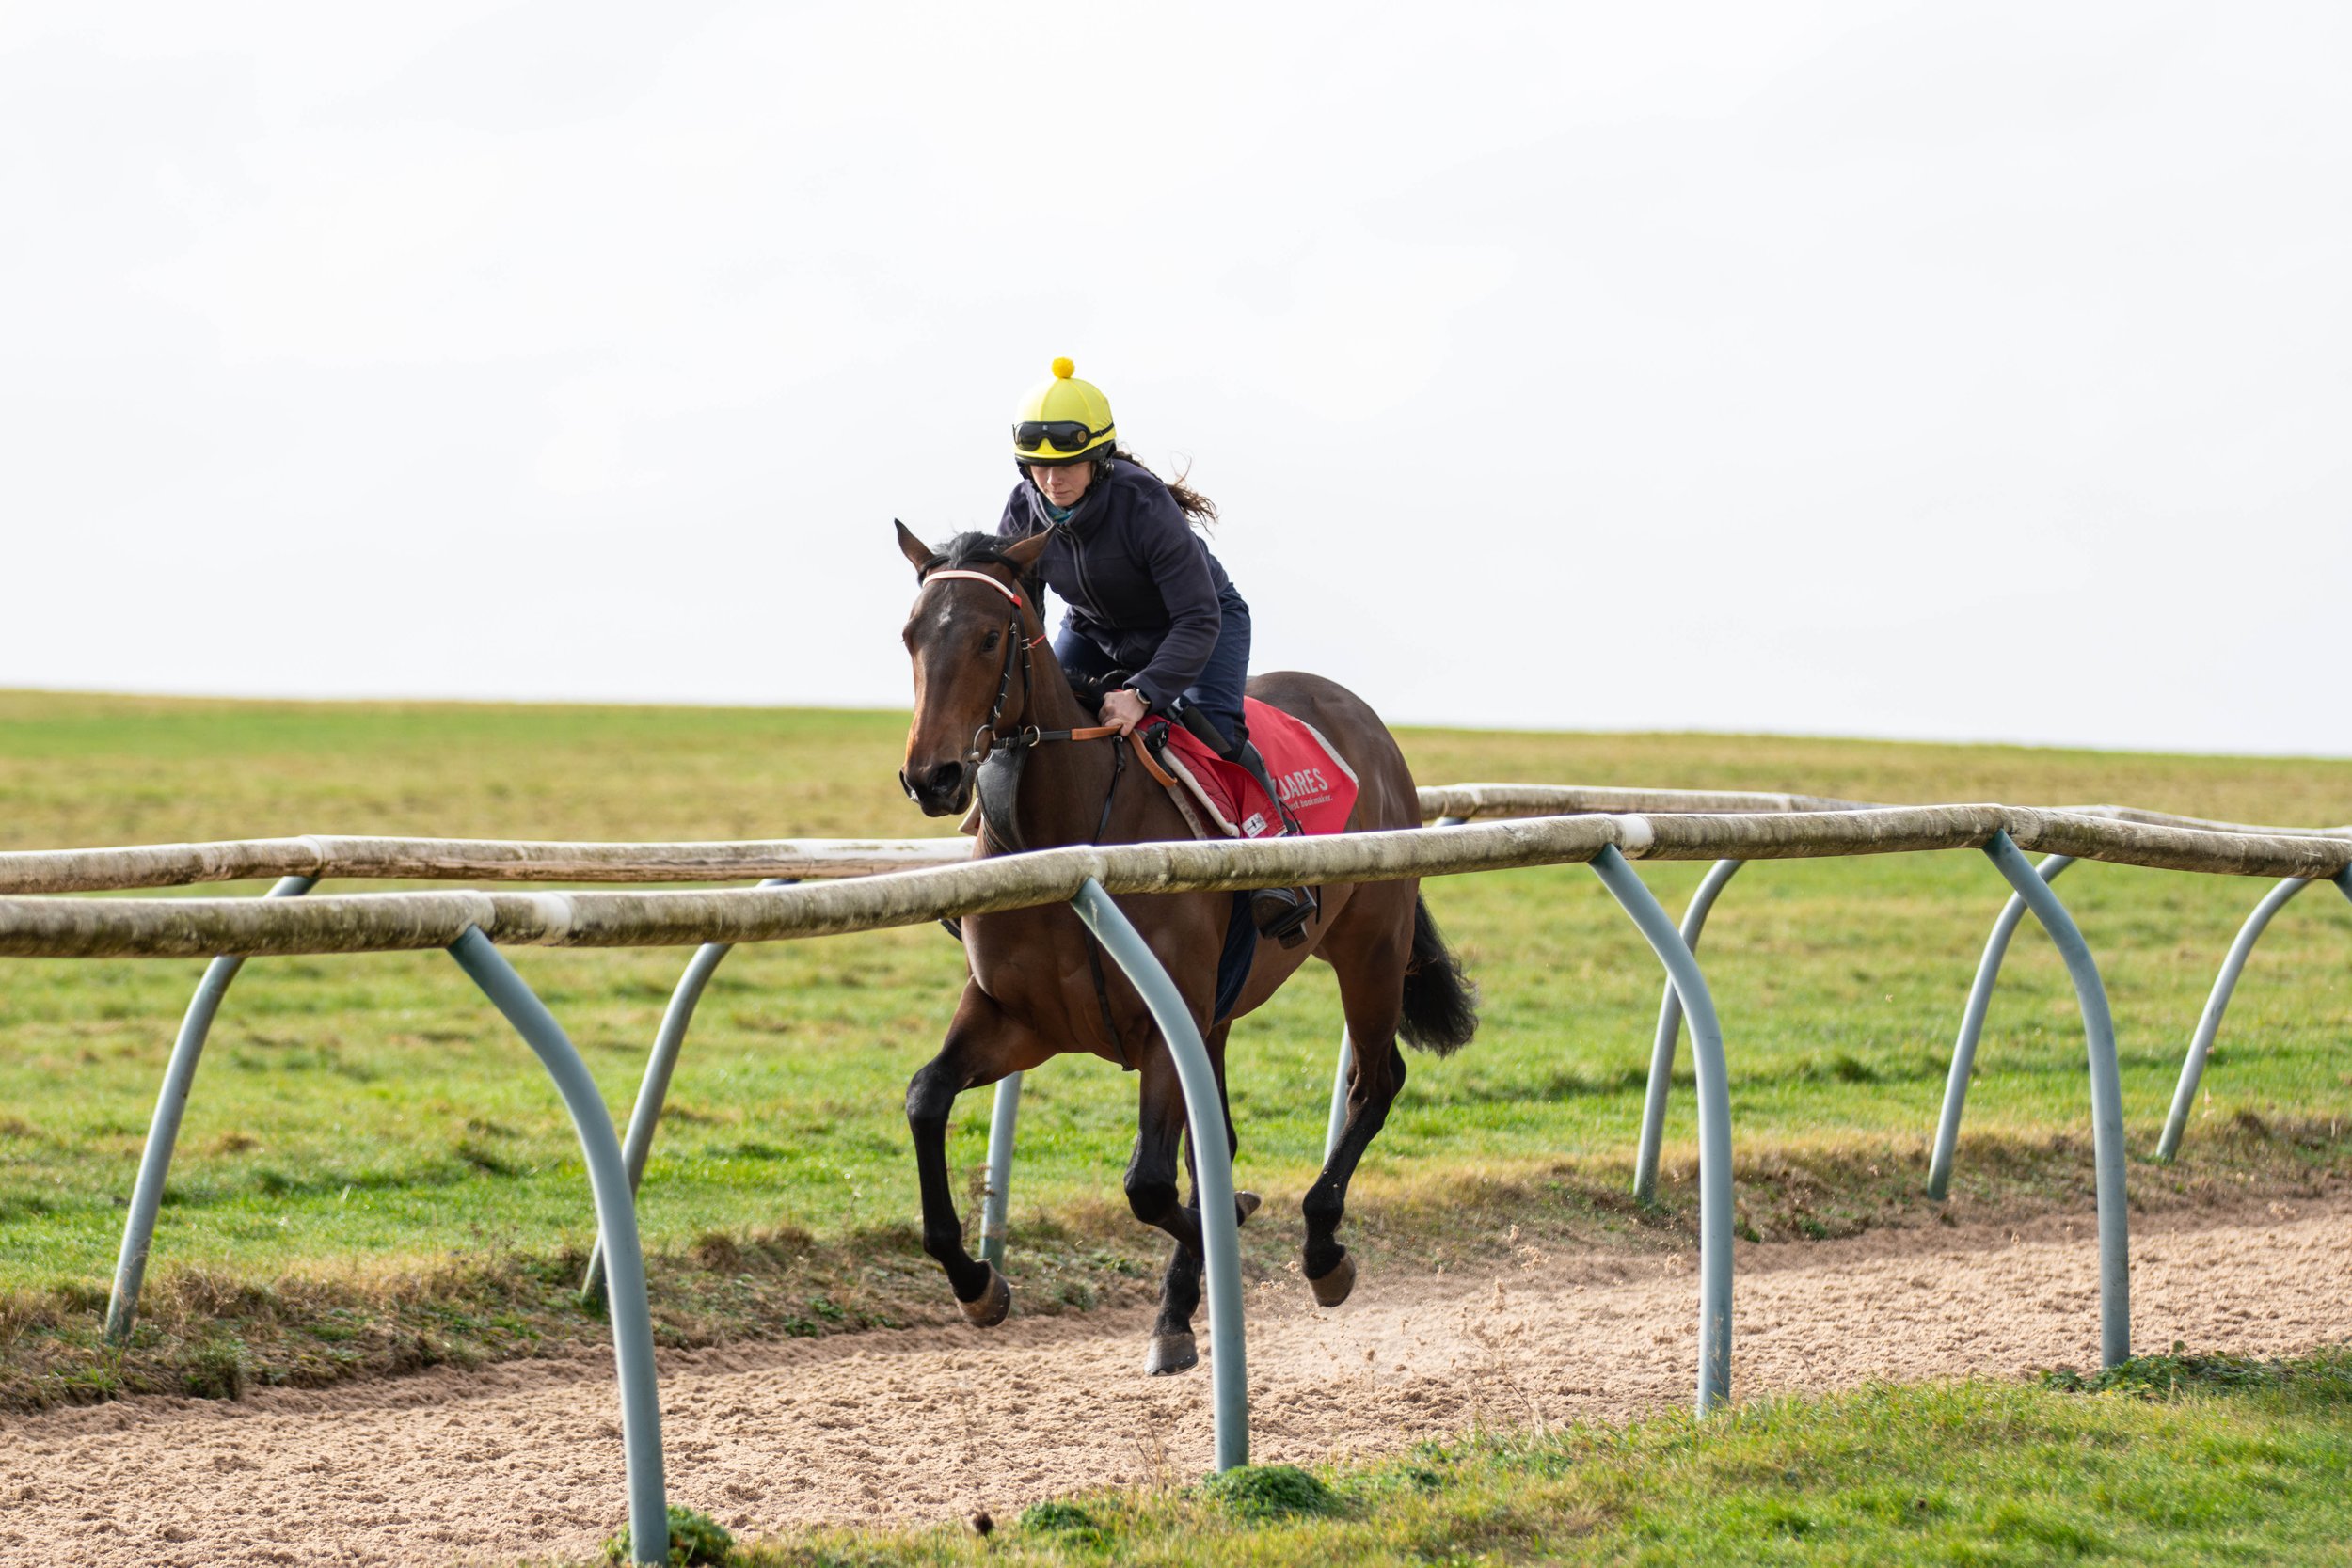 Darling on the chalk pit canter